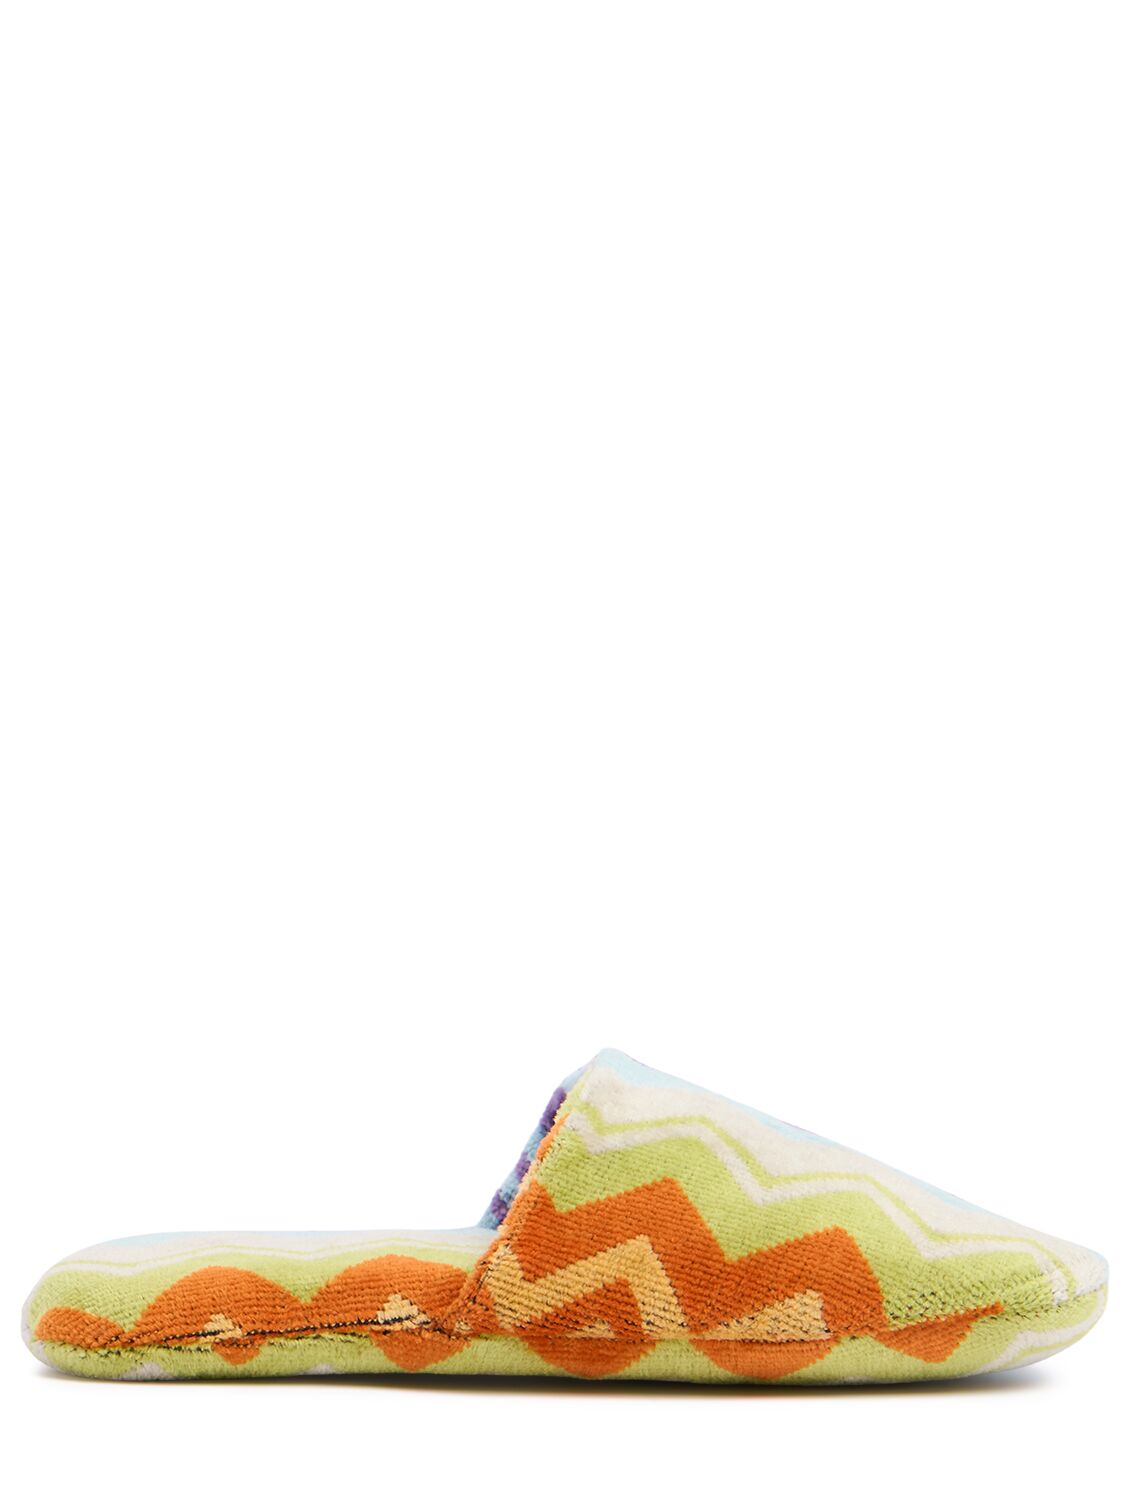 Missoni Giacomo Soft Terry Slippers In Multicolor